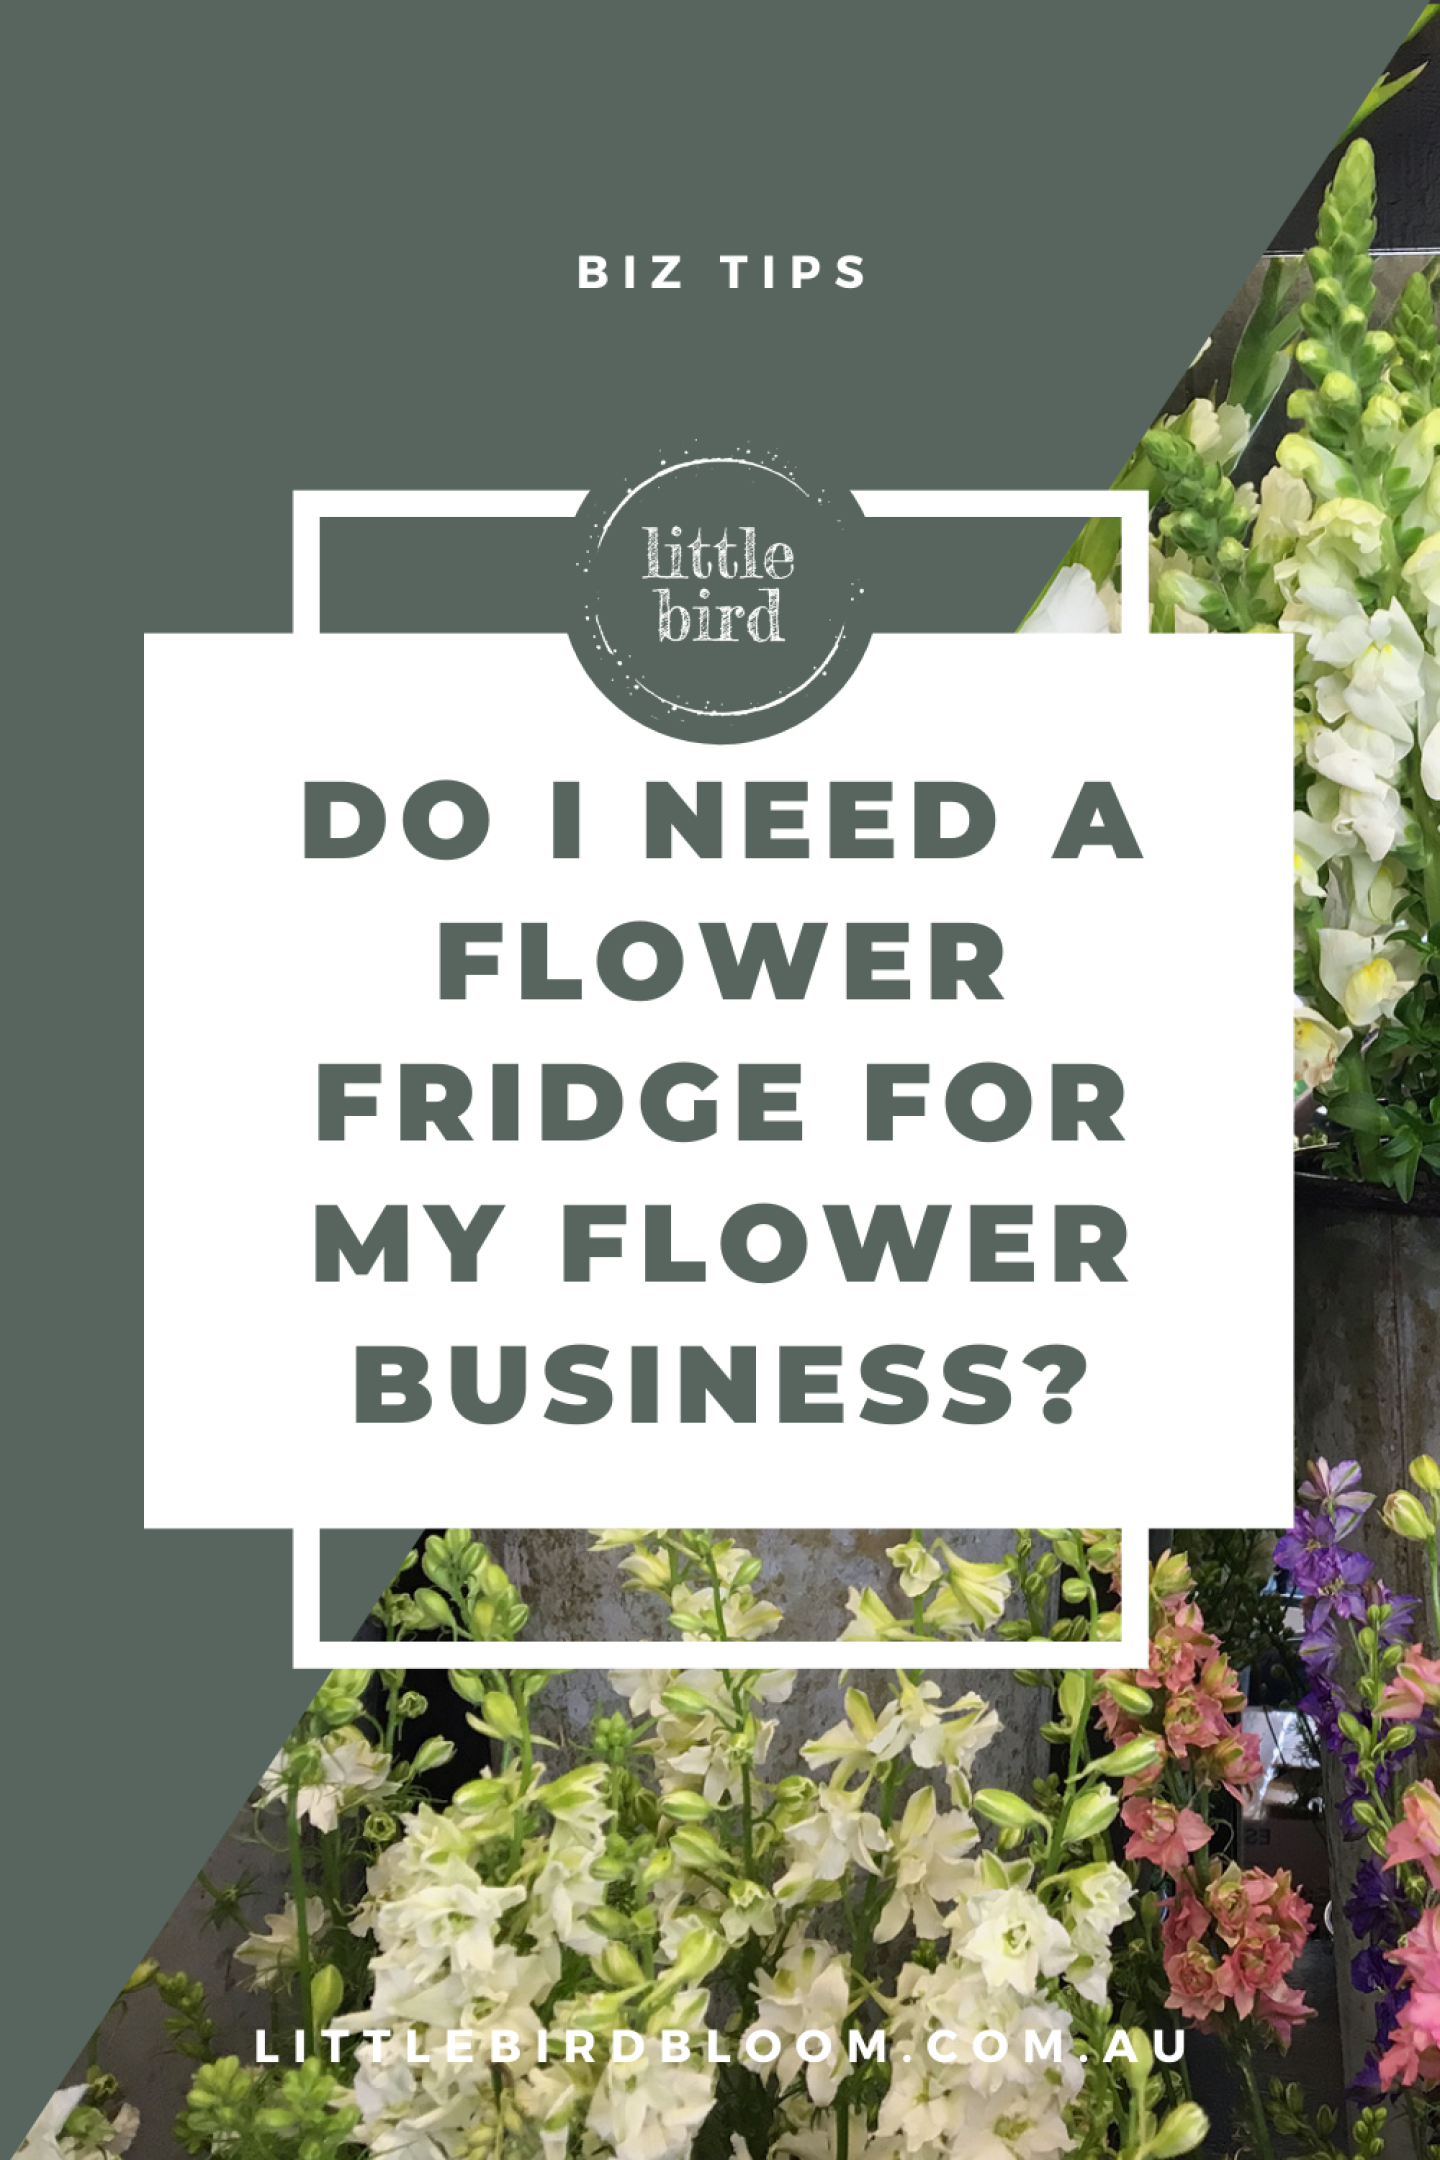 Do I need a flower cooler for my flower business?